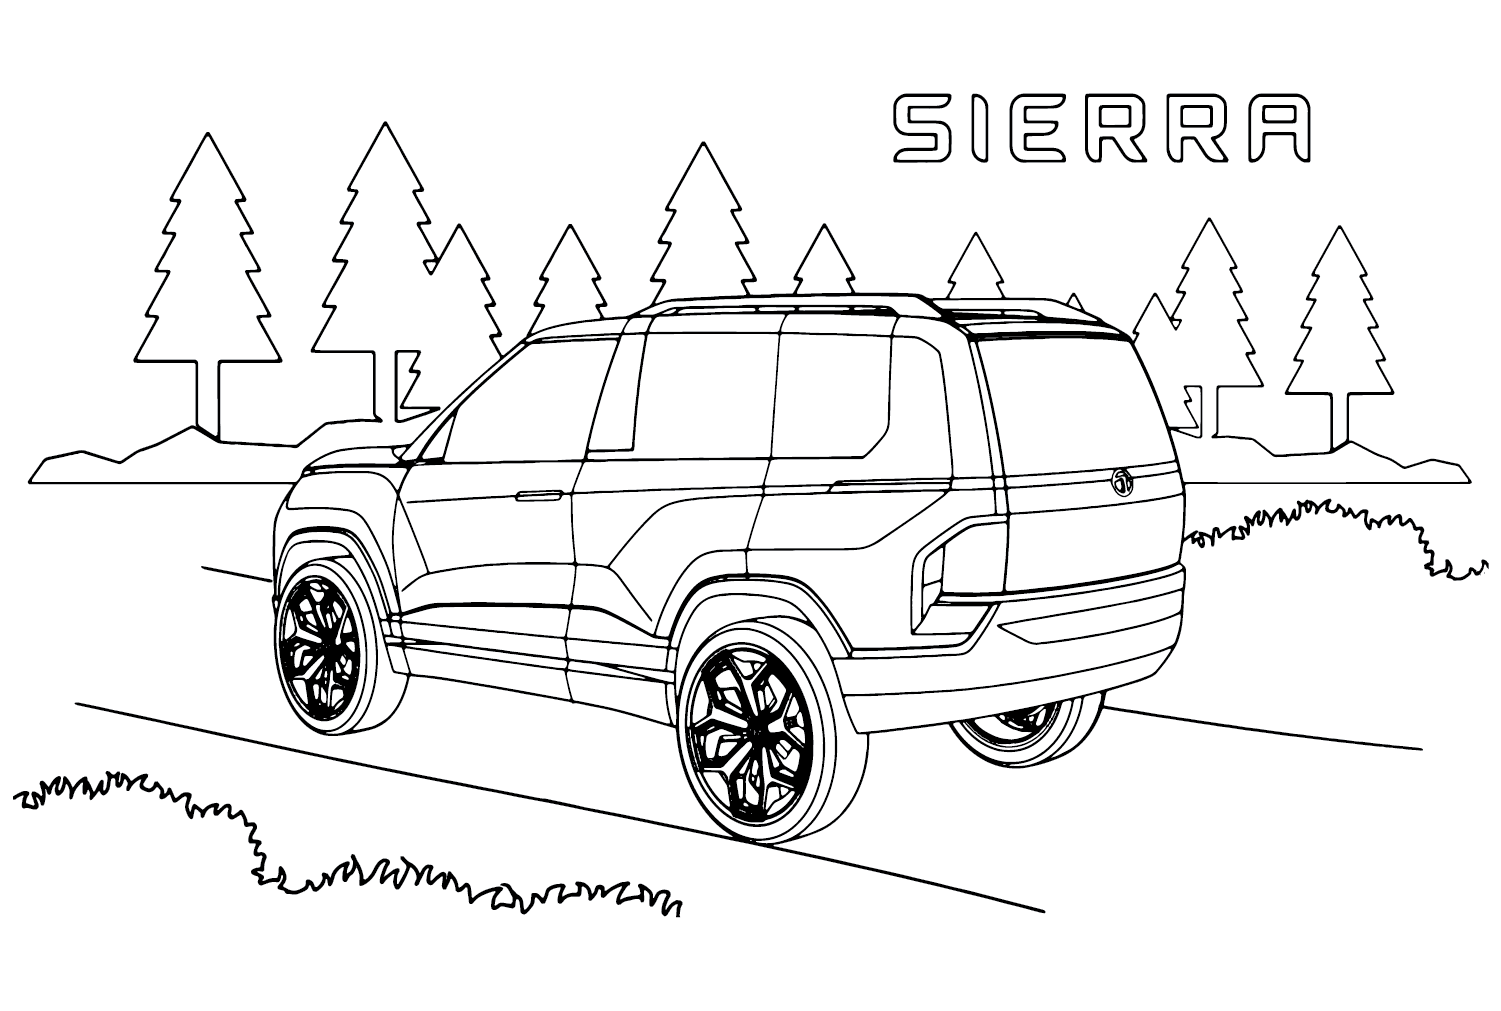 Tata Sierra Coloring Page from Tata